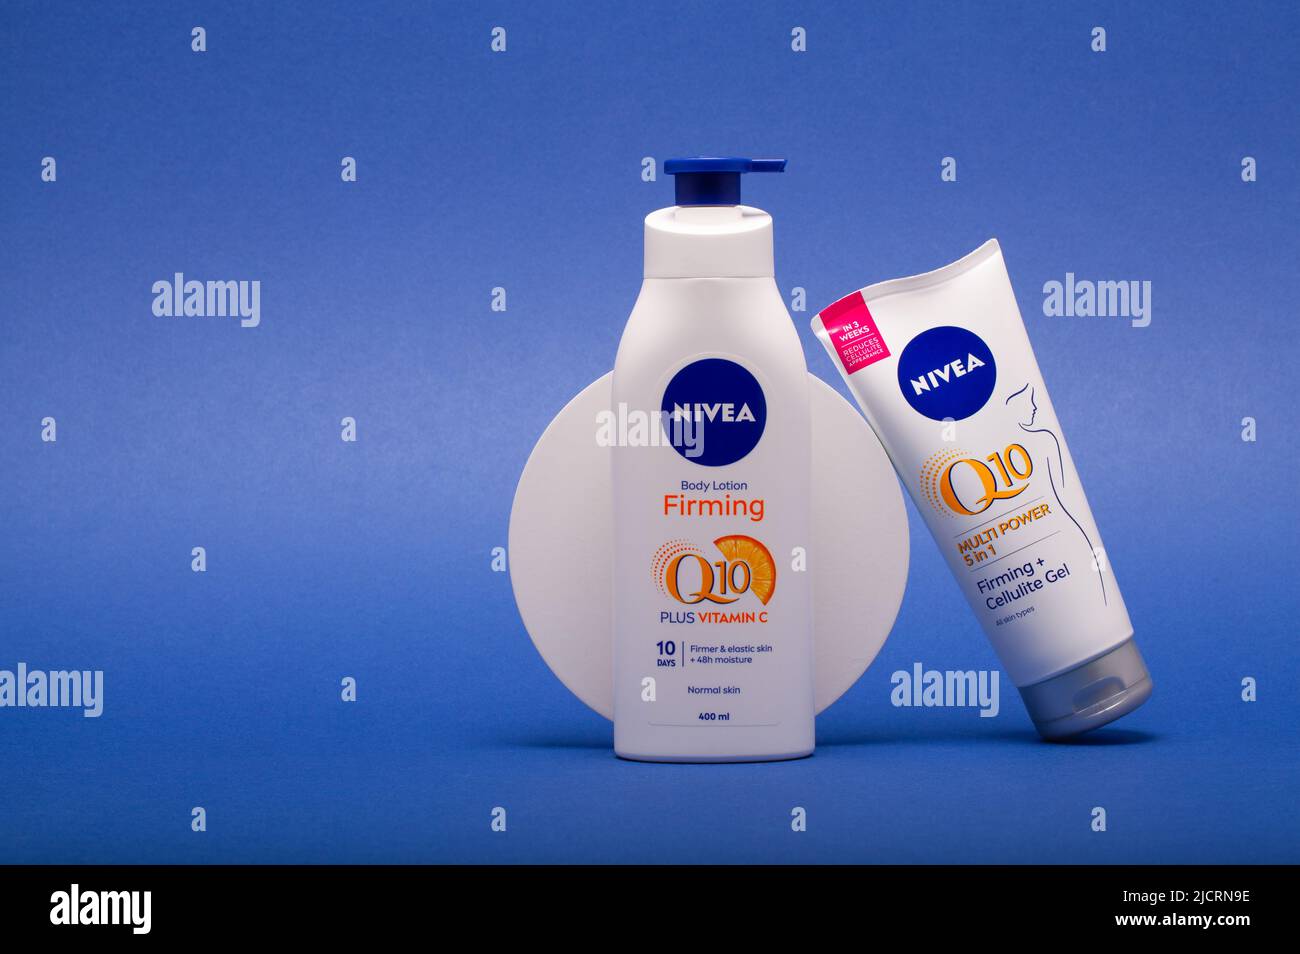 Prague,Czech Republic - 12 November,2021: Nivea Q10 Body Lotion Firming and Cellulitide Gel isolated on the blue background. Nivea brand owned by the Stock Photo